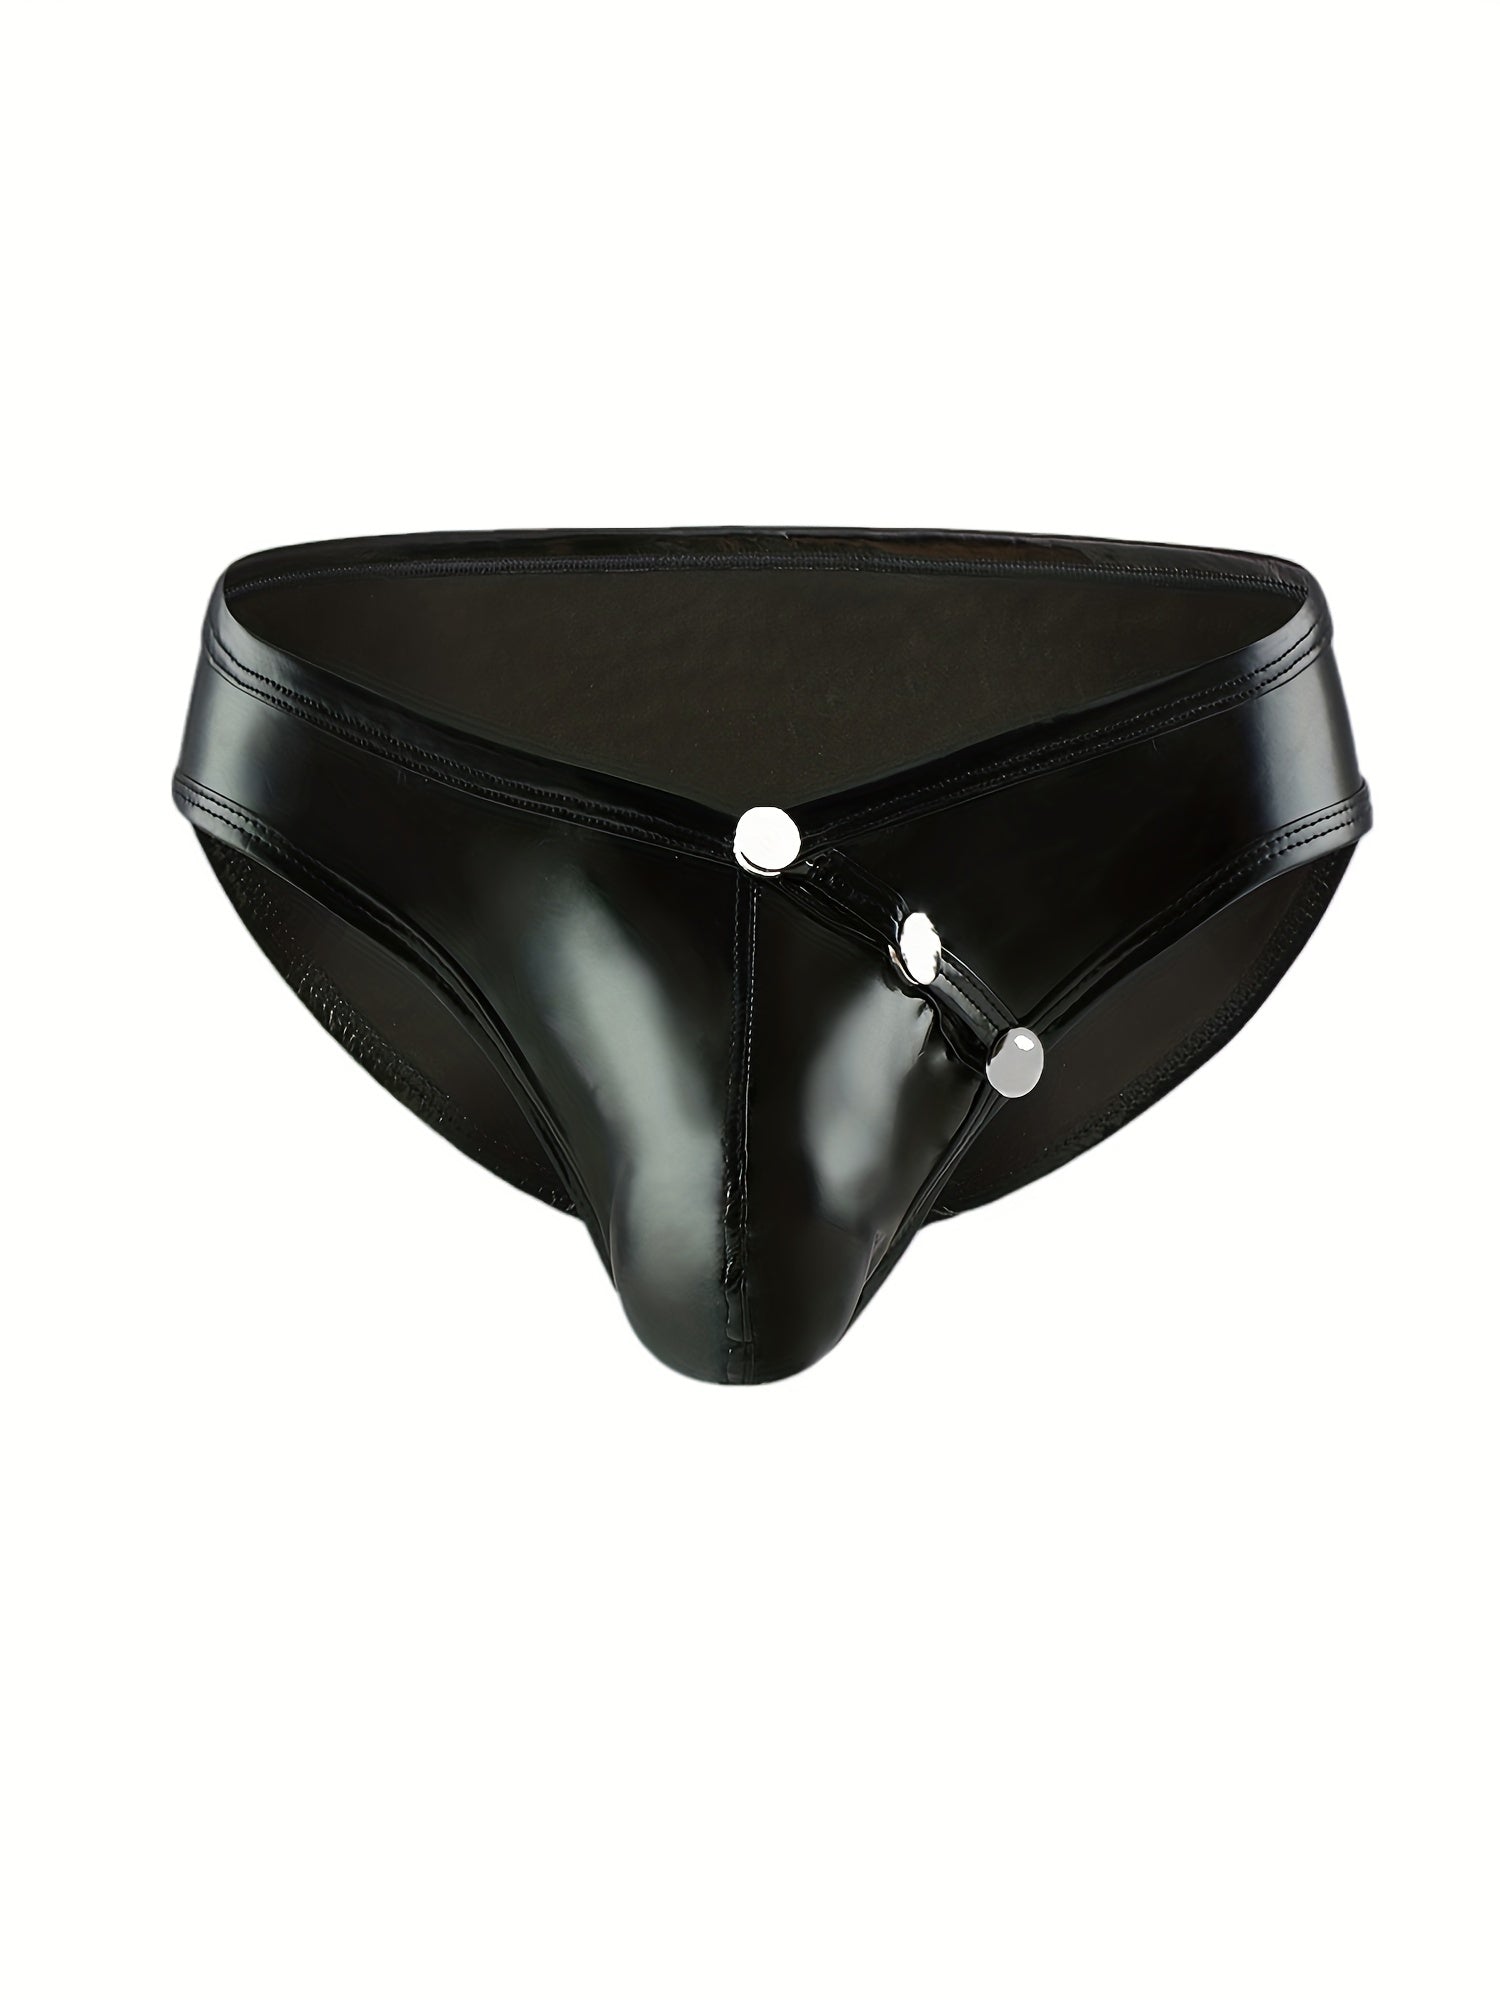 Patent Leather Knickers Low Waist Briefs Naughty Sexy Lingerie Athletic Supporter Jockstrap For Men